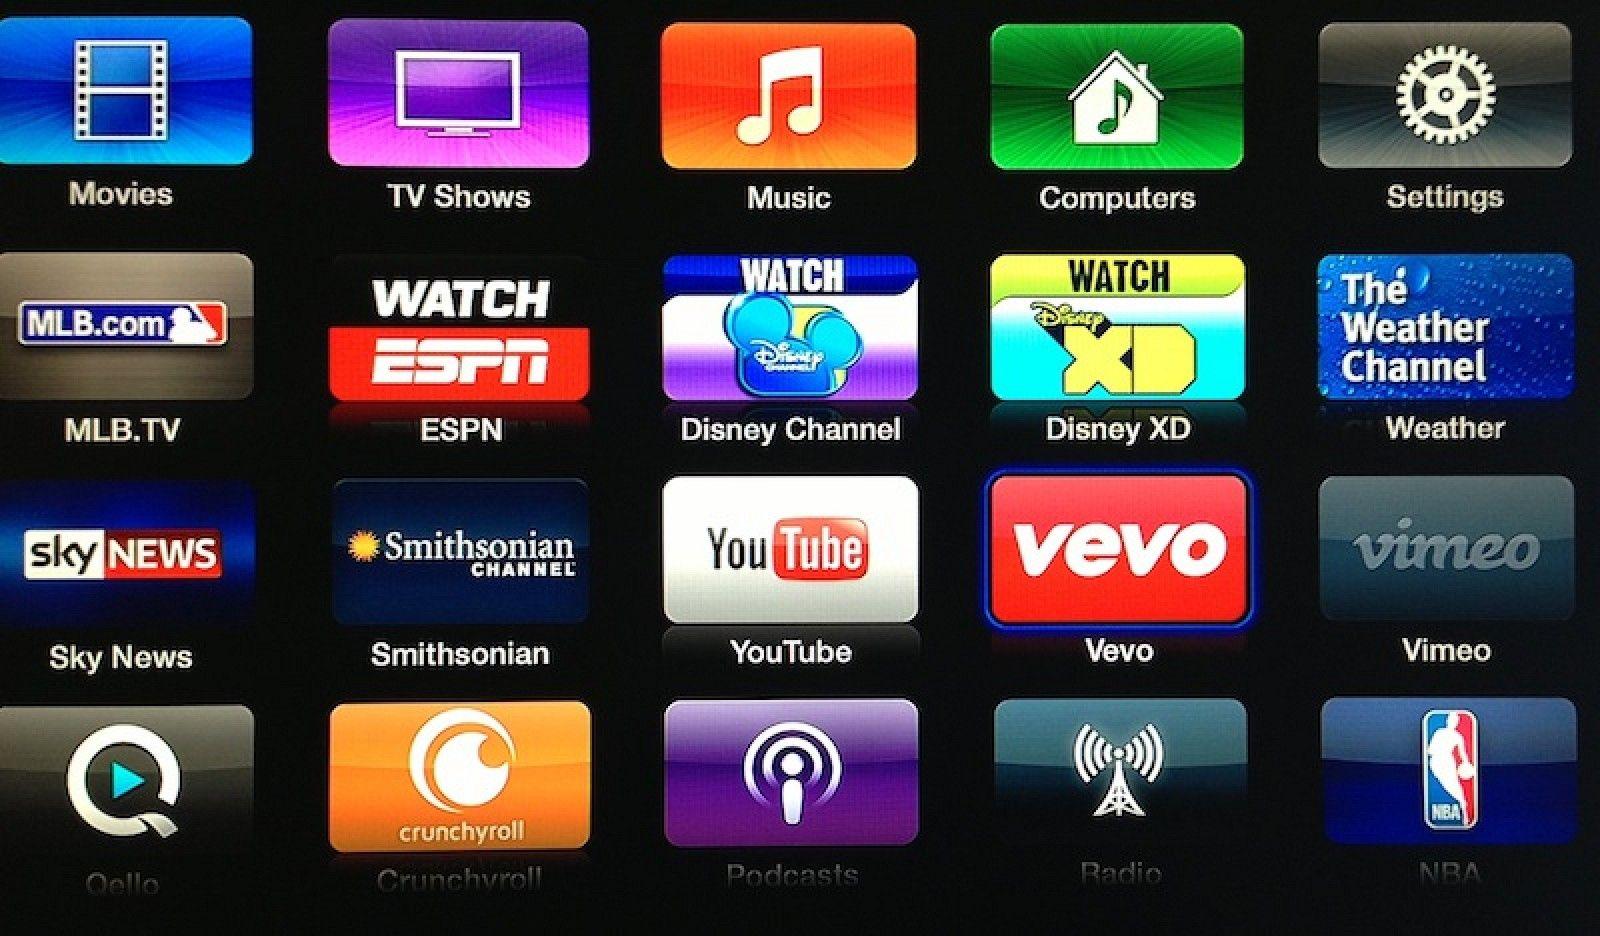 Disney Channel App Logo - Apple TV Adds Apps for Vevo, Weather Channel, Disney, and ...